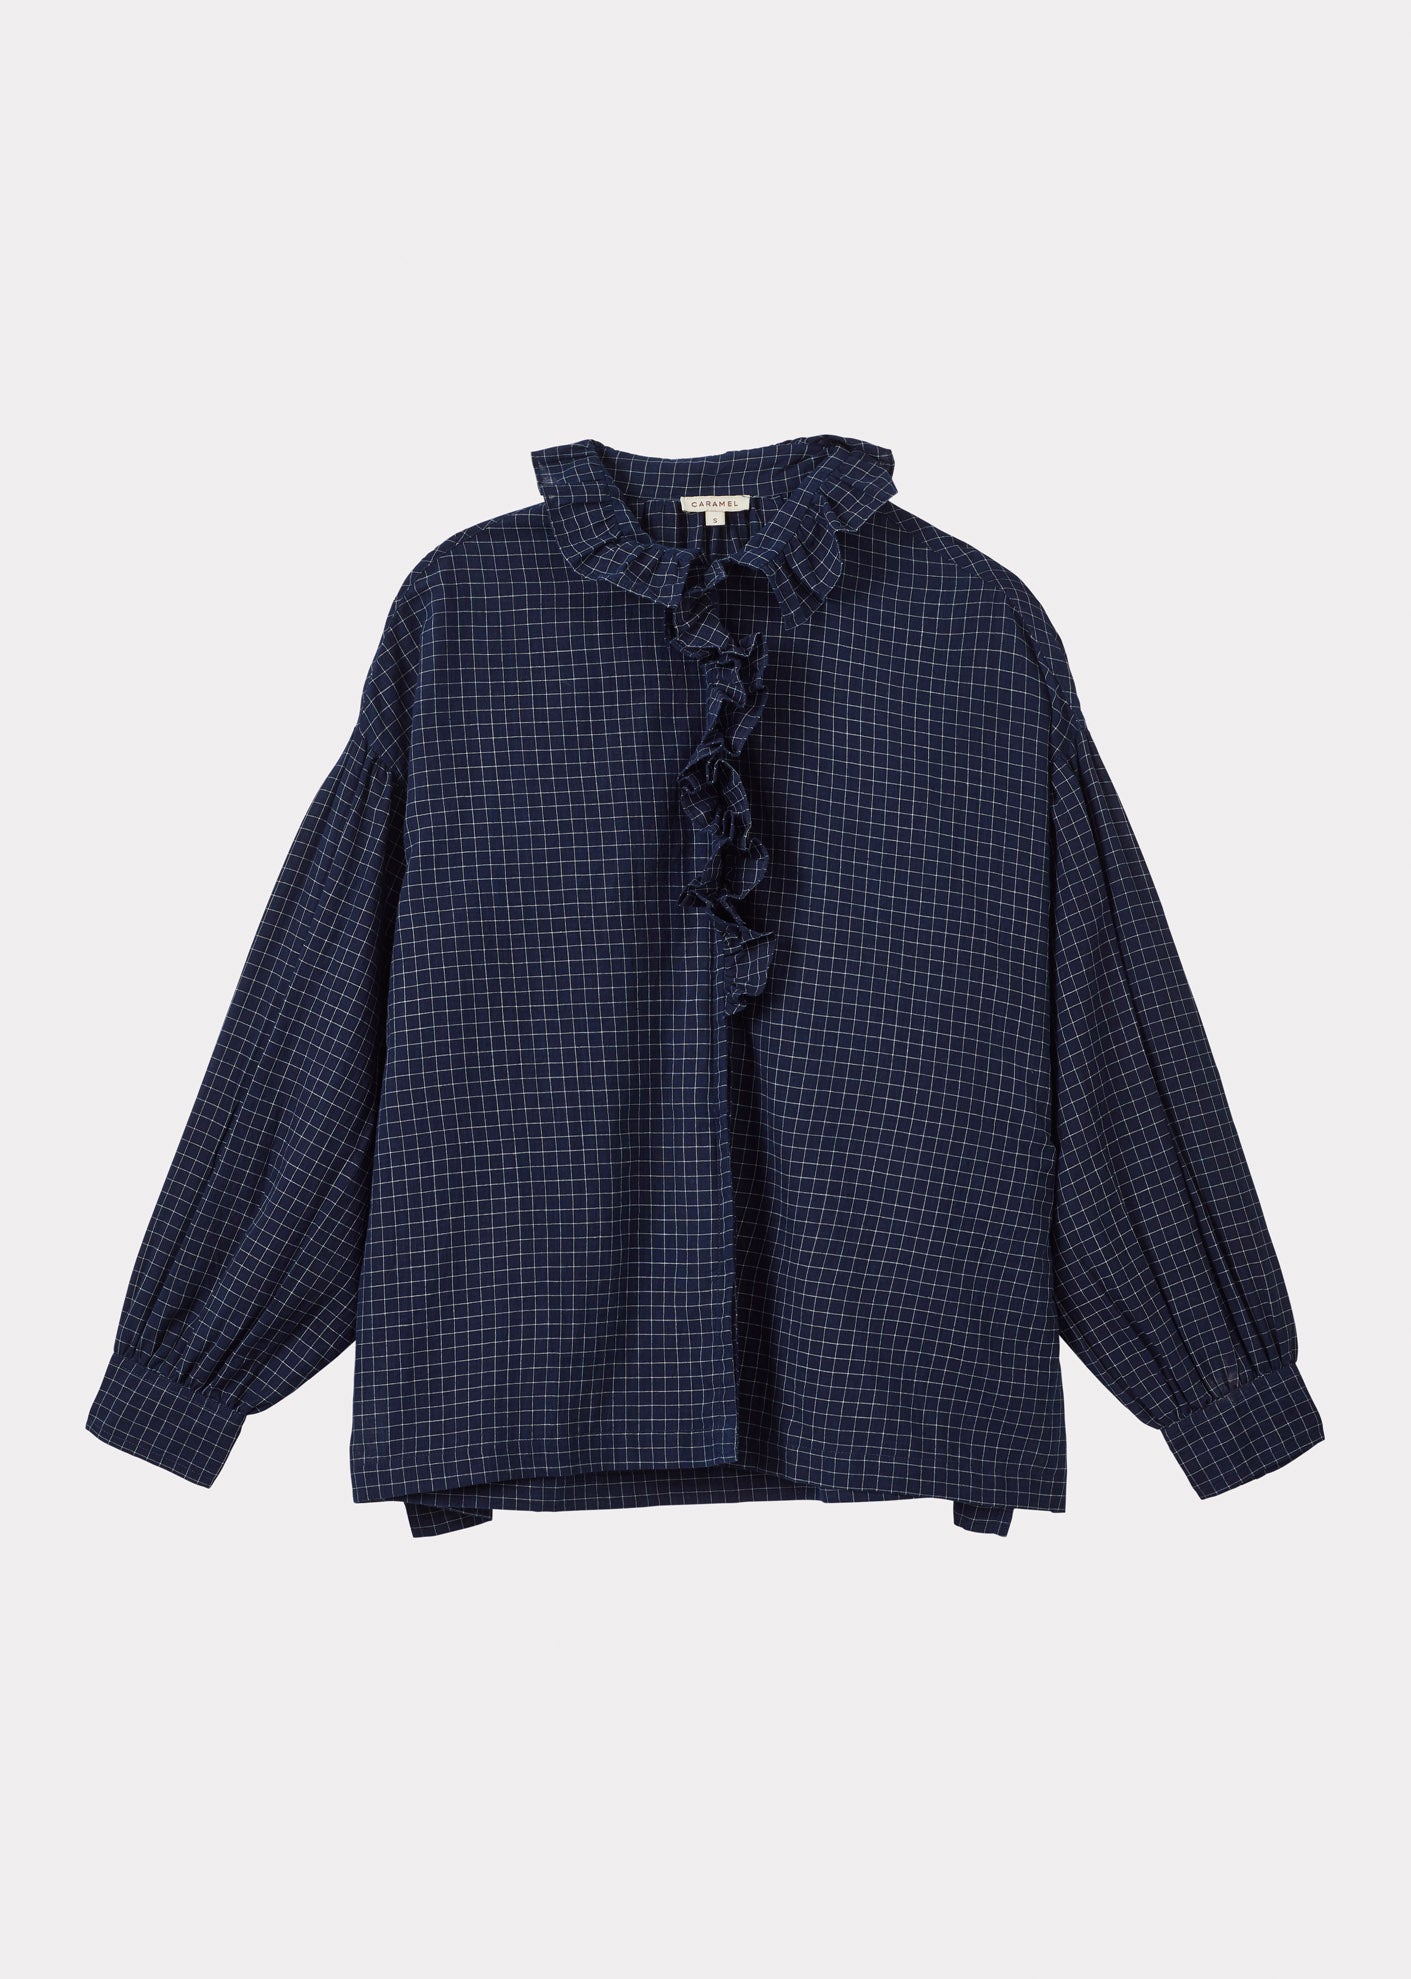 FRILL BLOUSE - NAVY YARN DYED CHECK